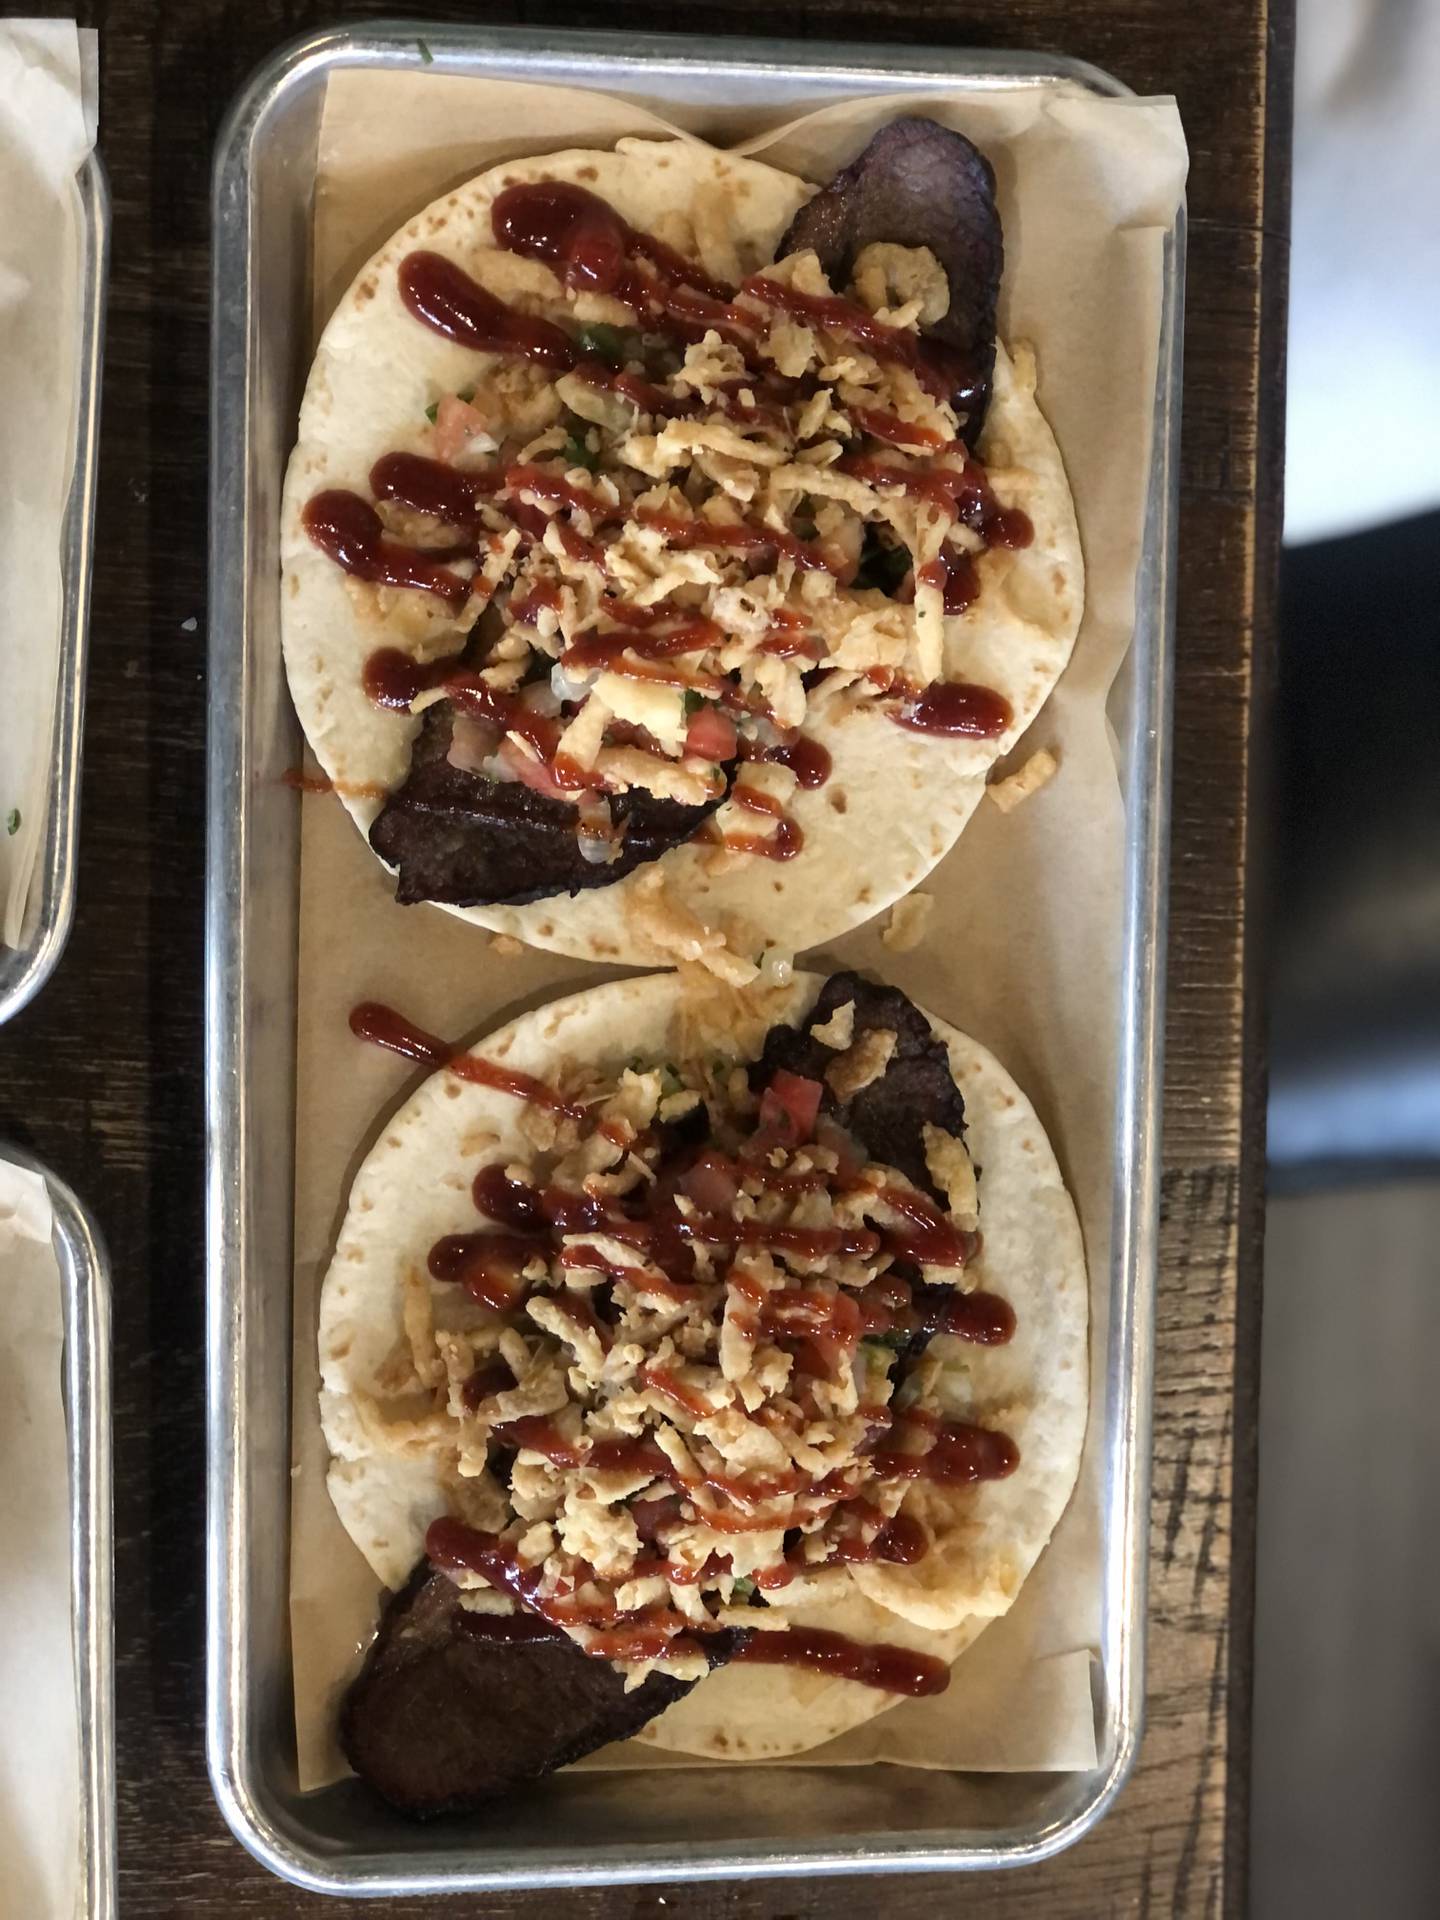 The Texan tacos at Cantina 52 were made with thinly sliced brisket and topped with crunchy onions and a nice, sweet Cattlemen’s barbecue sauce.